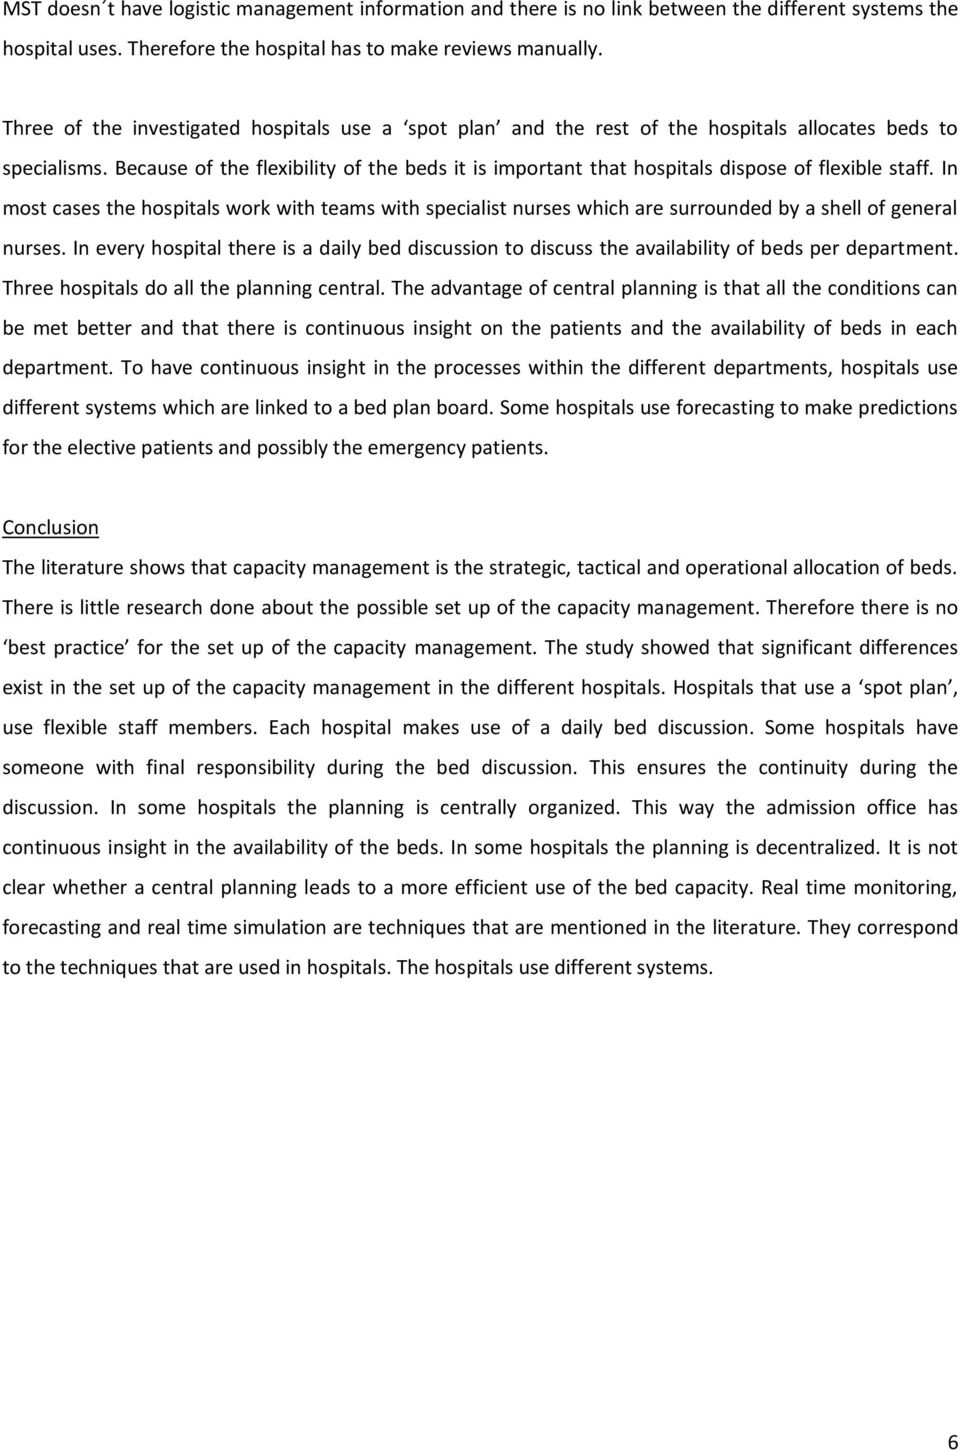 Because of the flexibility of the beds it is important that hospitals dispose of flexible staff.